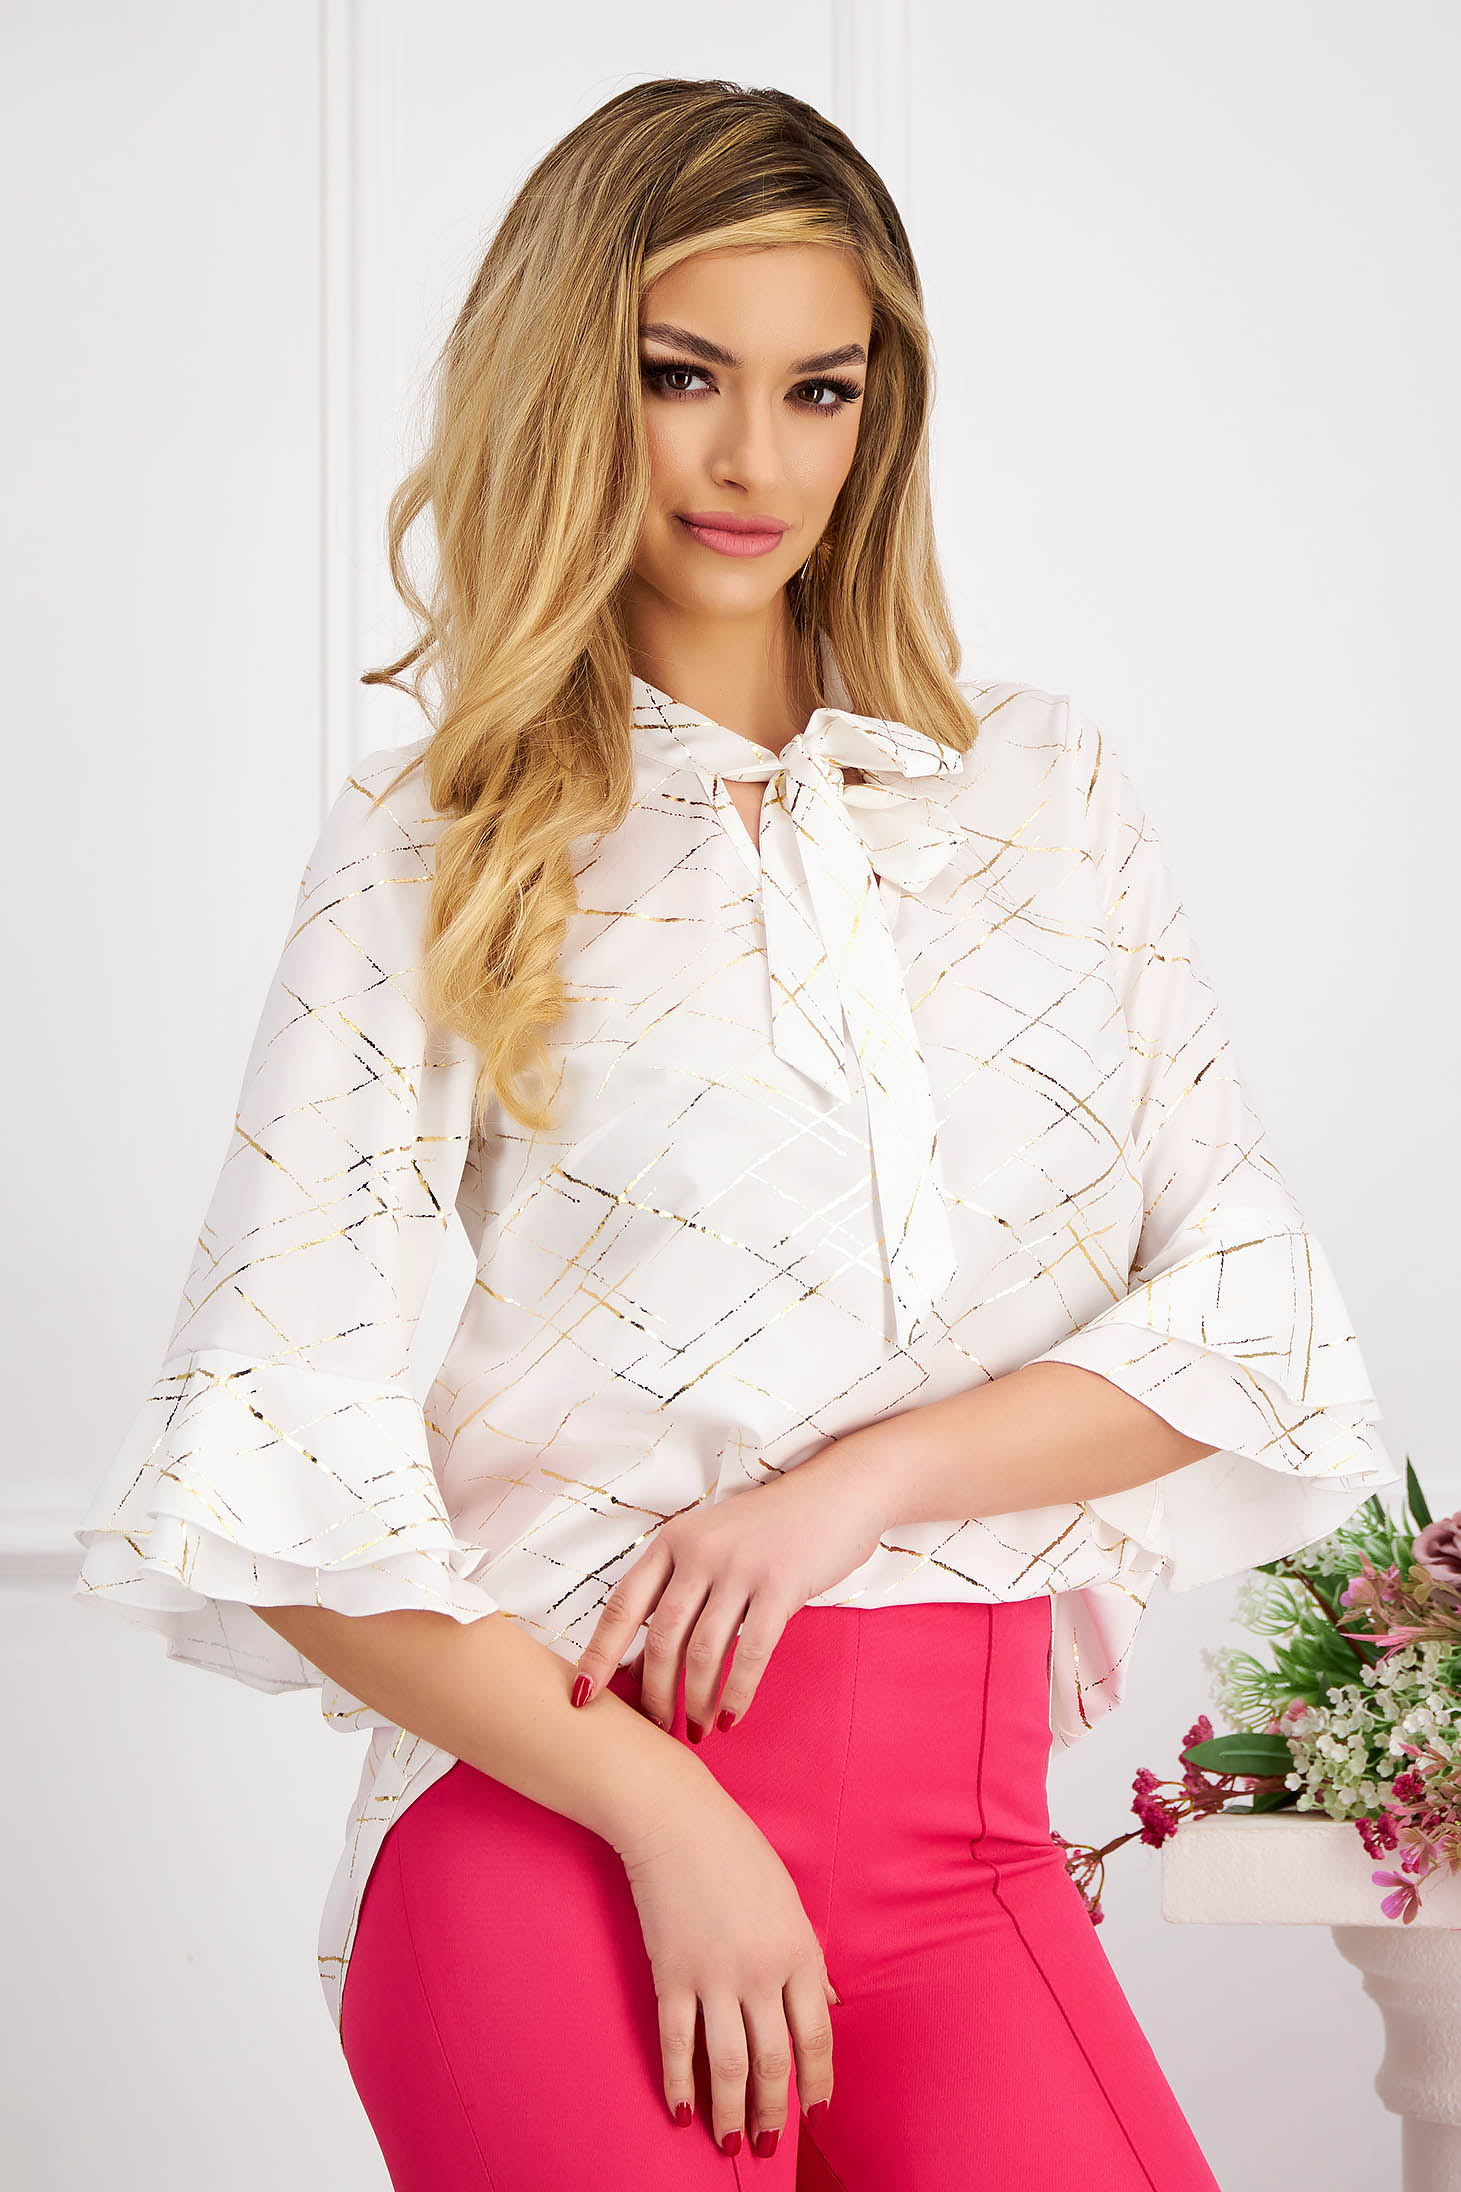 Ladies' blouse made of thin white material with a wide asymmetrical cut and scarf-type collar - StarShinerS 1 - StarShinerS.com